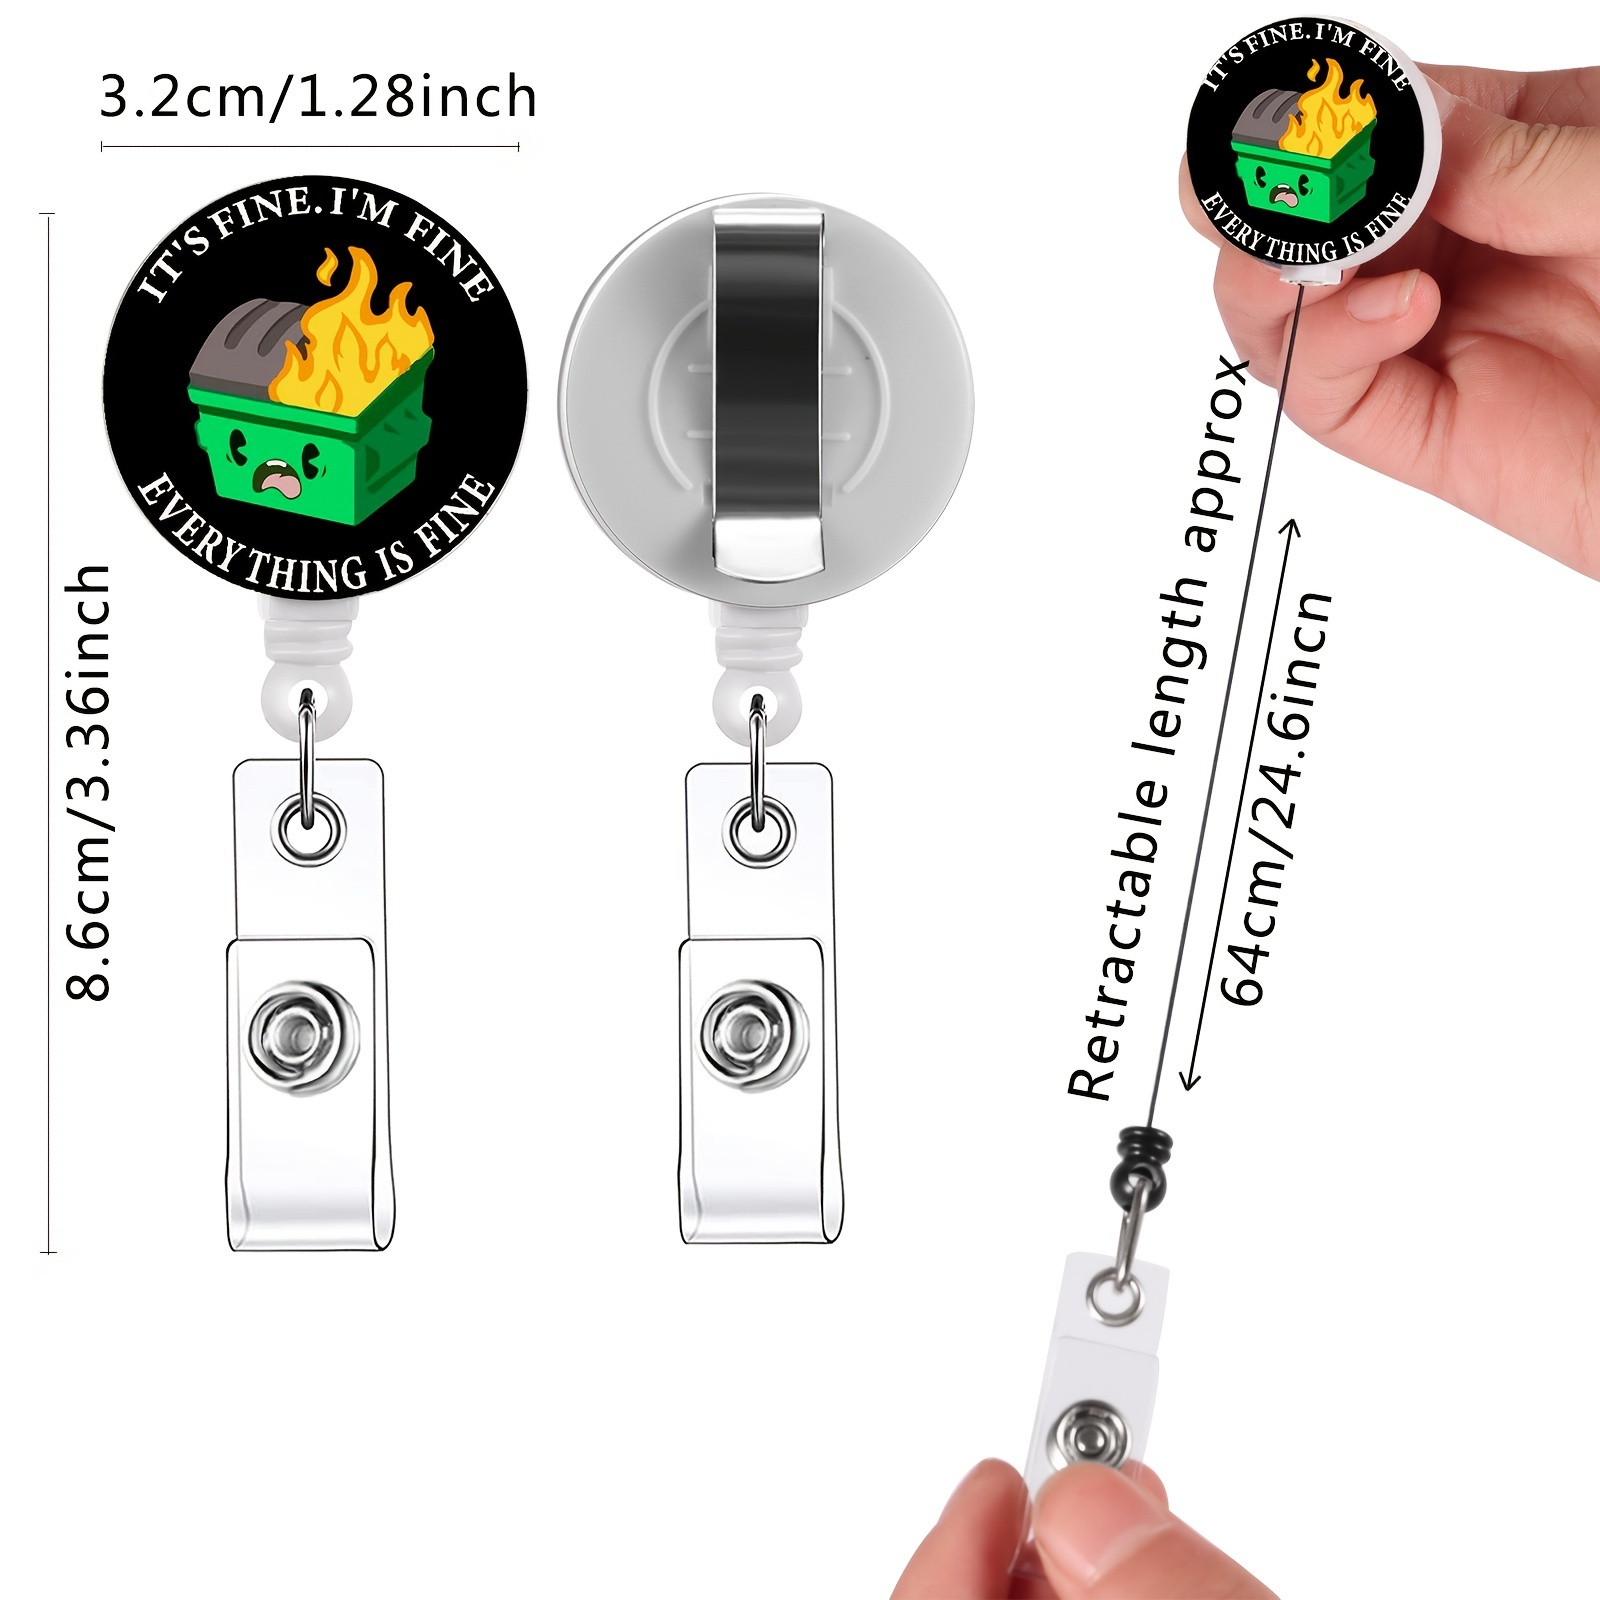 5pcs Markers with initials Badge Reels Retractable Badge Holders, Xray Badge Reel Cute Badge Reel ID Badge Holder Retractable Clip, Dumpster Fire